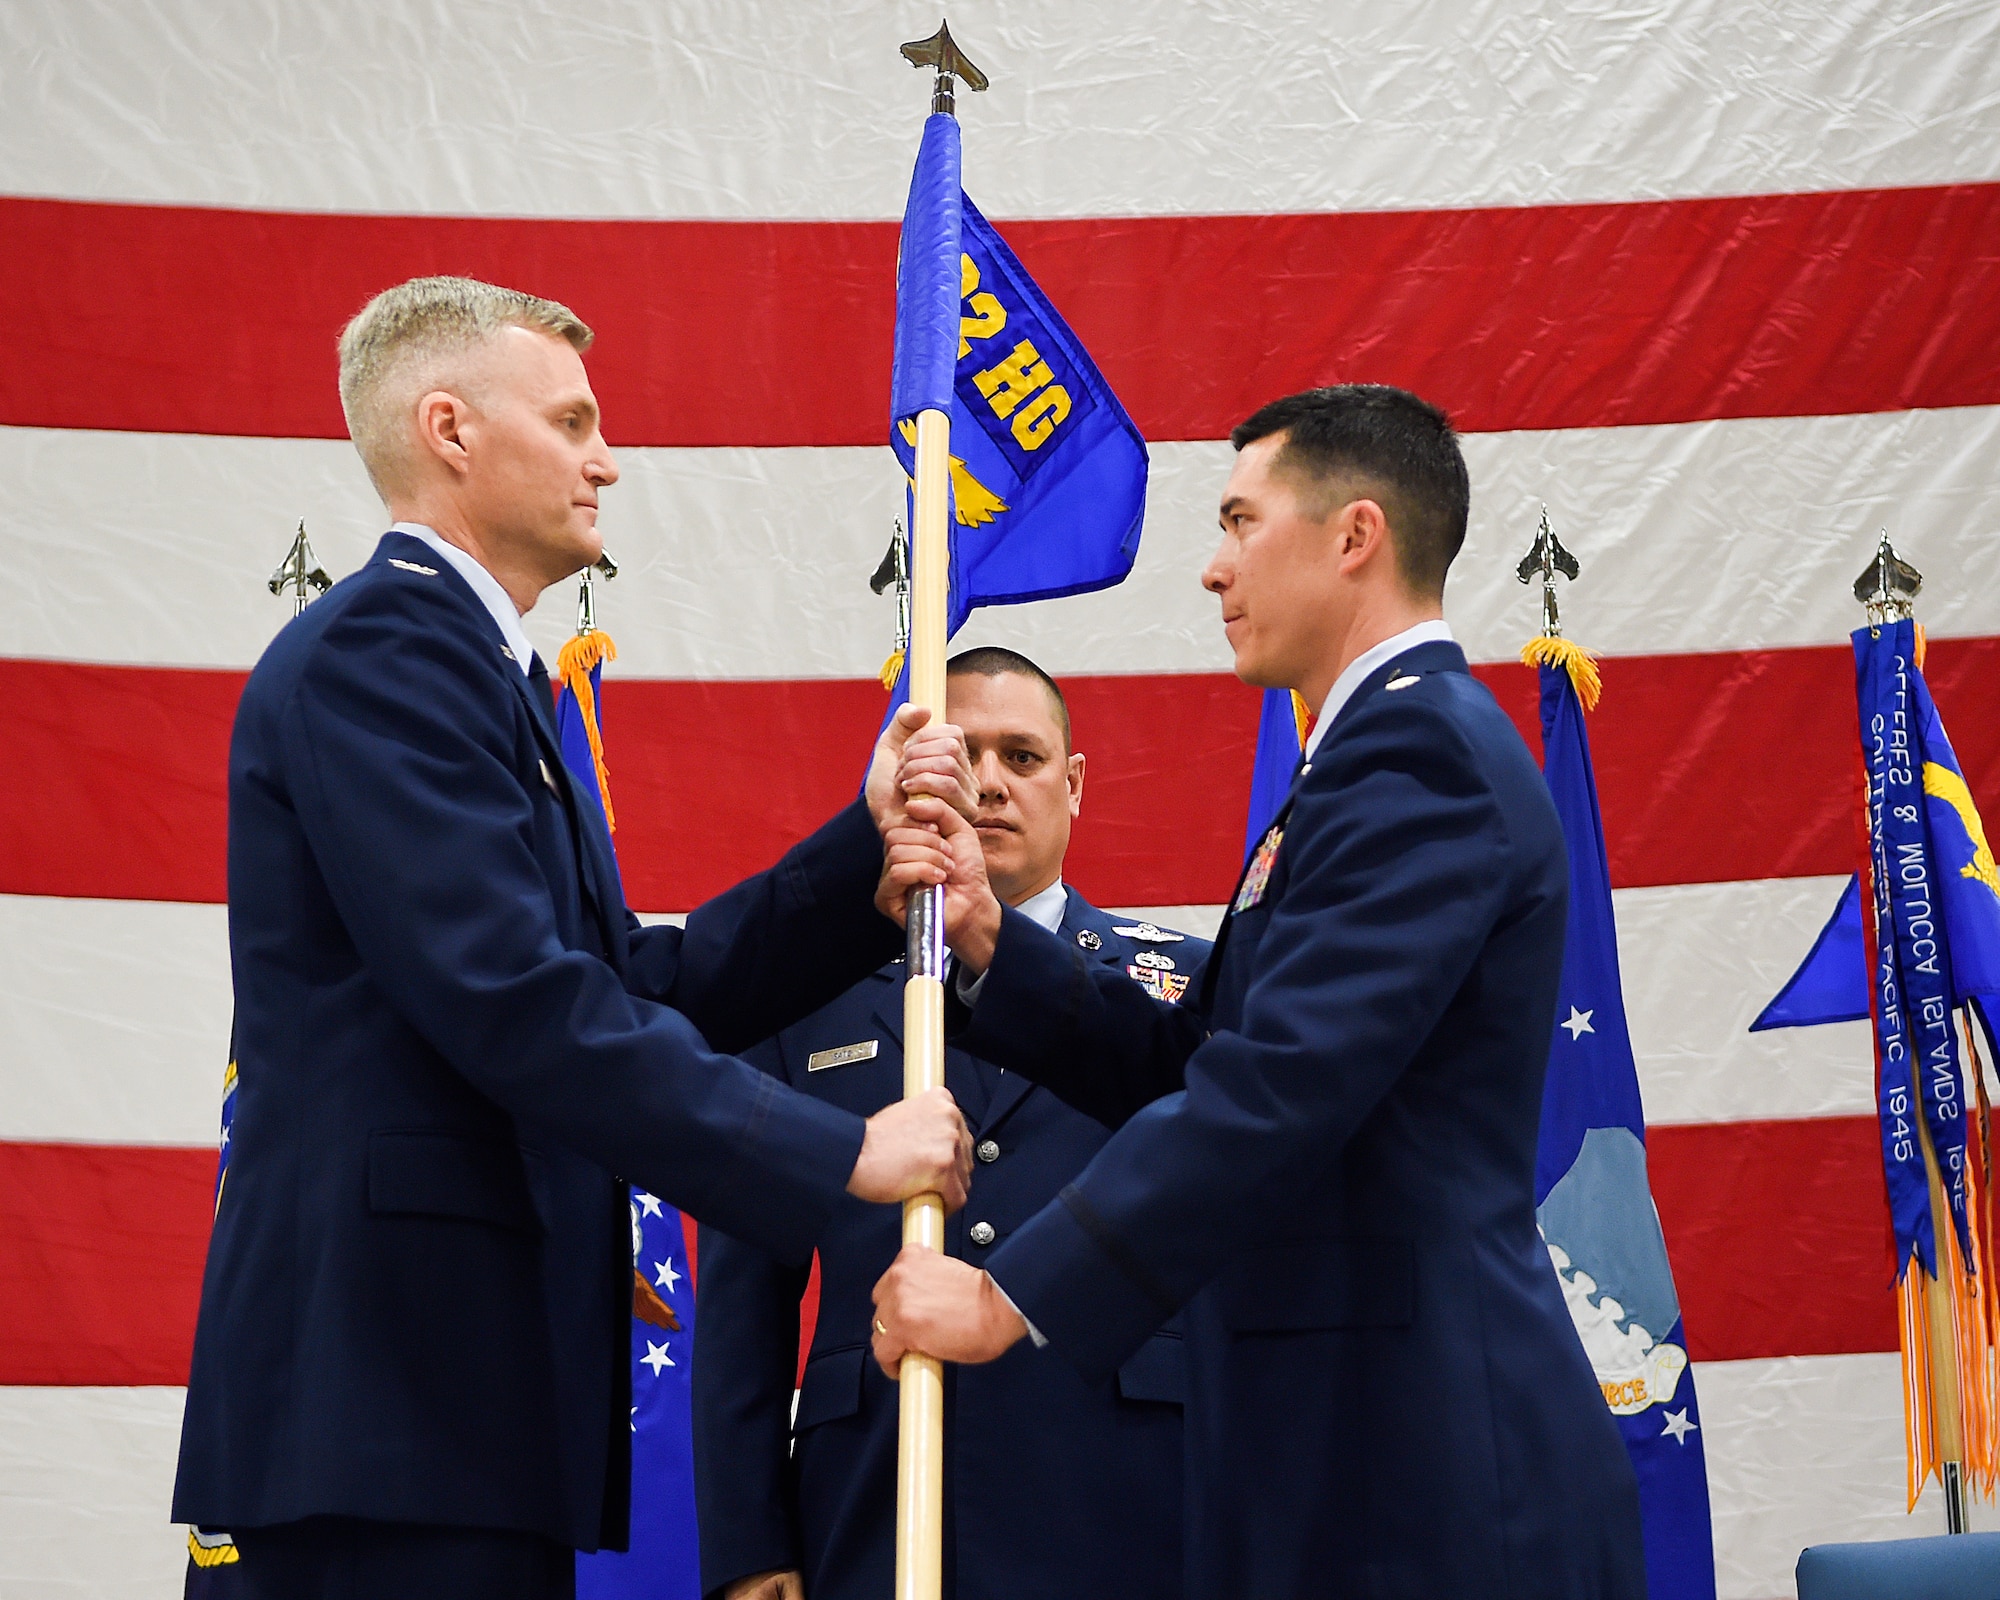 Col. Dave Smith, 582nd Helicopter Group commander, hands the guidon of the newly established 582nd Operations Support Squadron to Lt. Col. James Blanchard during the squadron’s assumption of command ceremony March 27, 2015, on F.E. Warren Air Force Base, Wyo. Detachments from the 582nd OSS will be established at the three missile bases under 20th to provide maintenance and support for the groups’ squadrons. (U.S. Air Force photo by R.J. Oriez/Released)